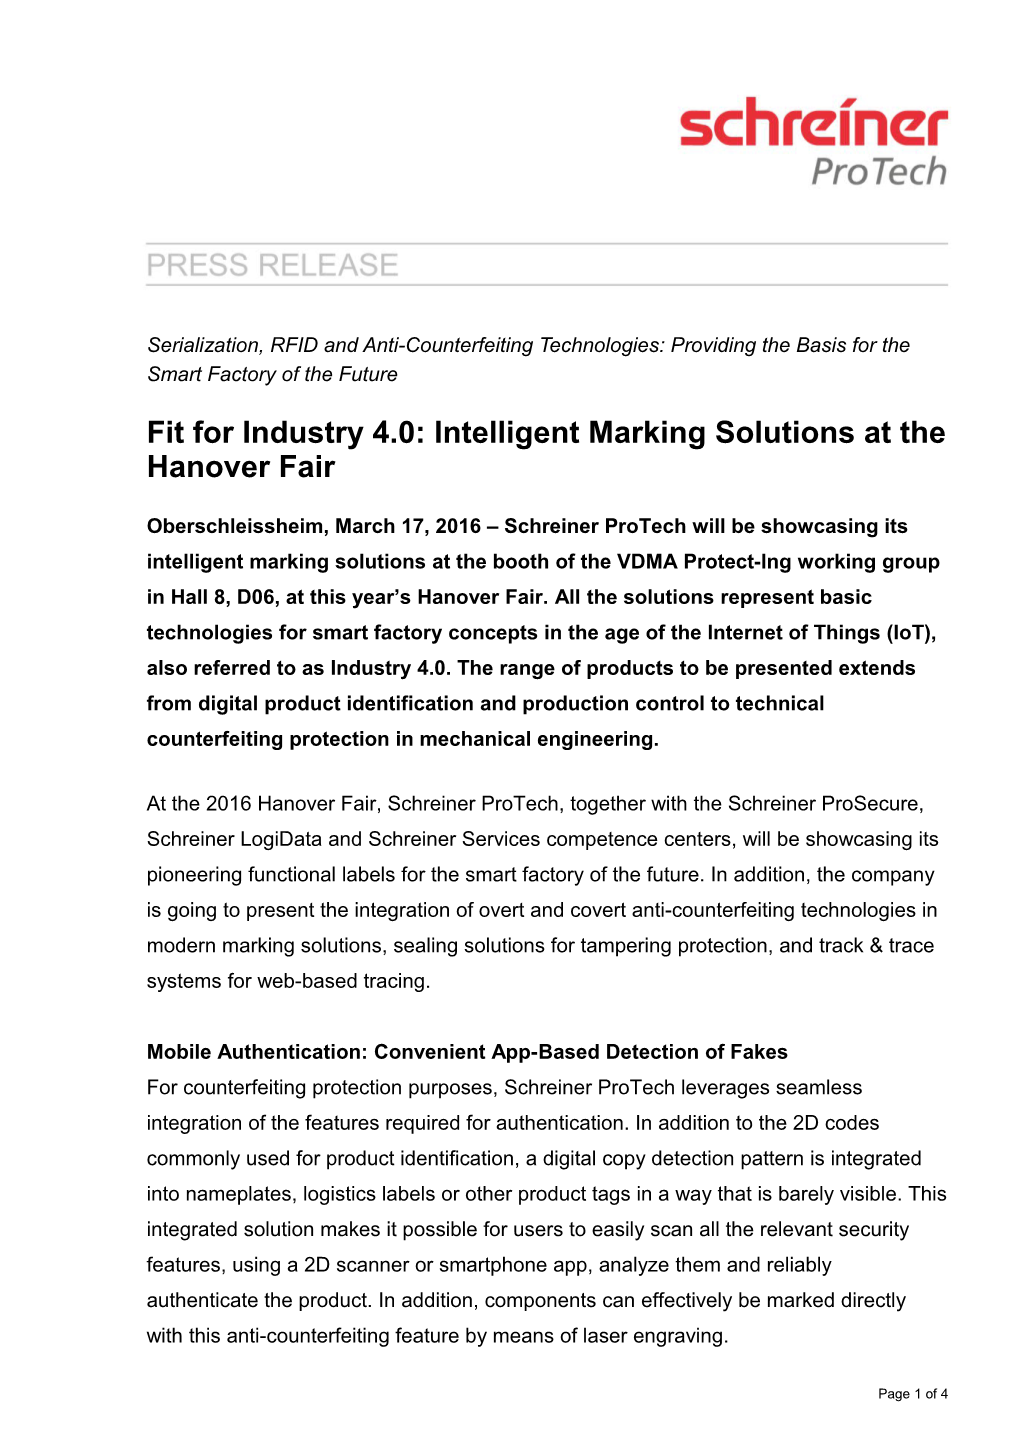 Fit for Industry 4.0: Intelligent Marking Solutions at the Hanover Fair